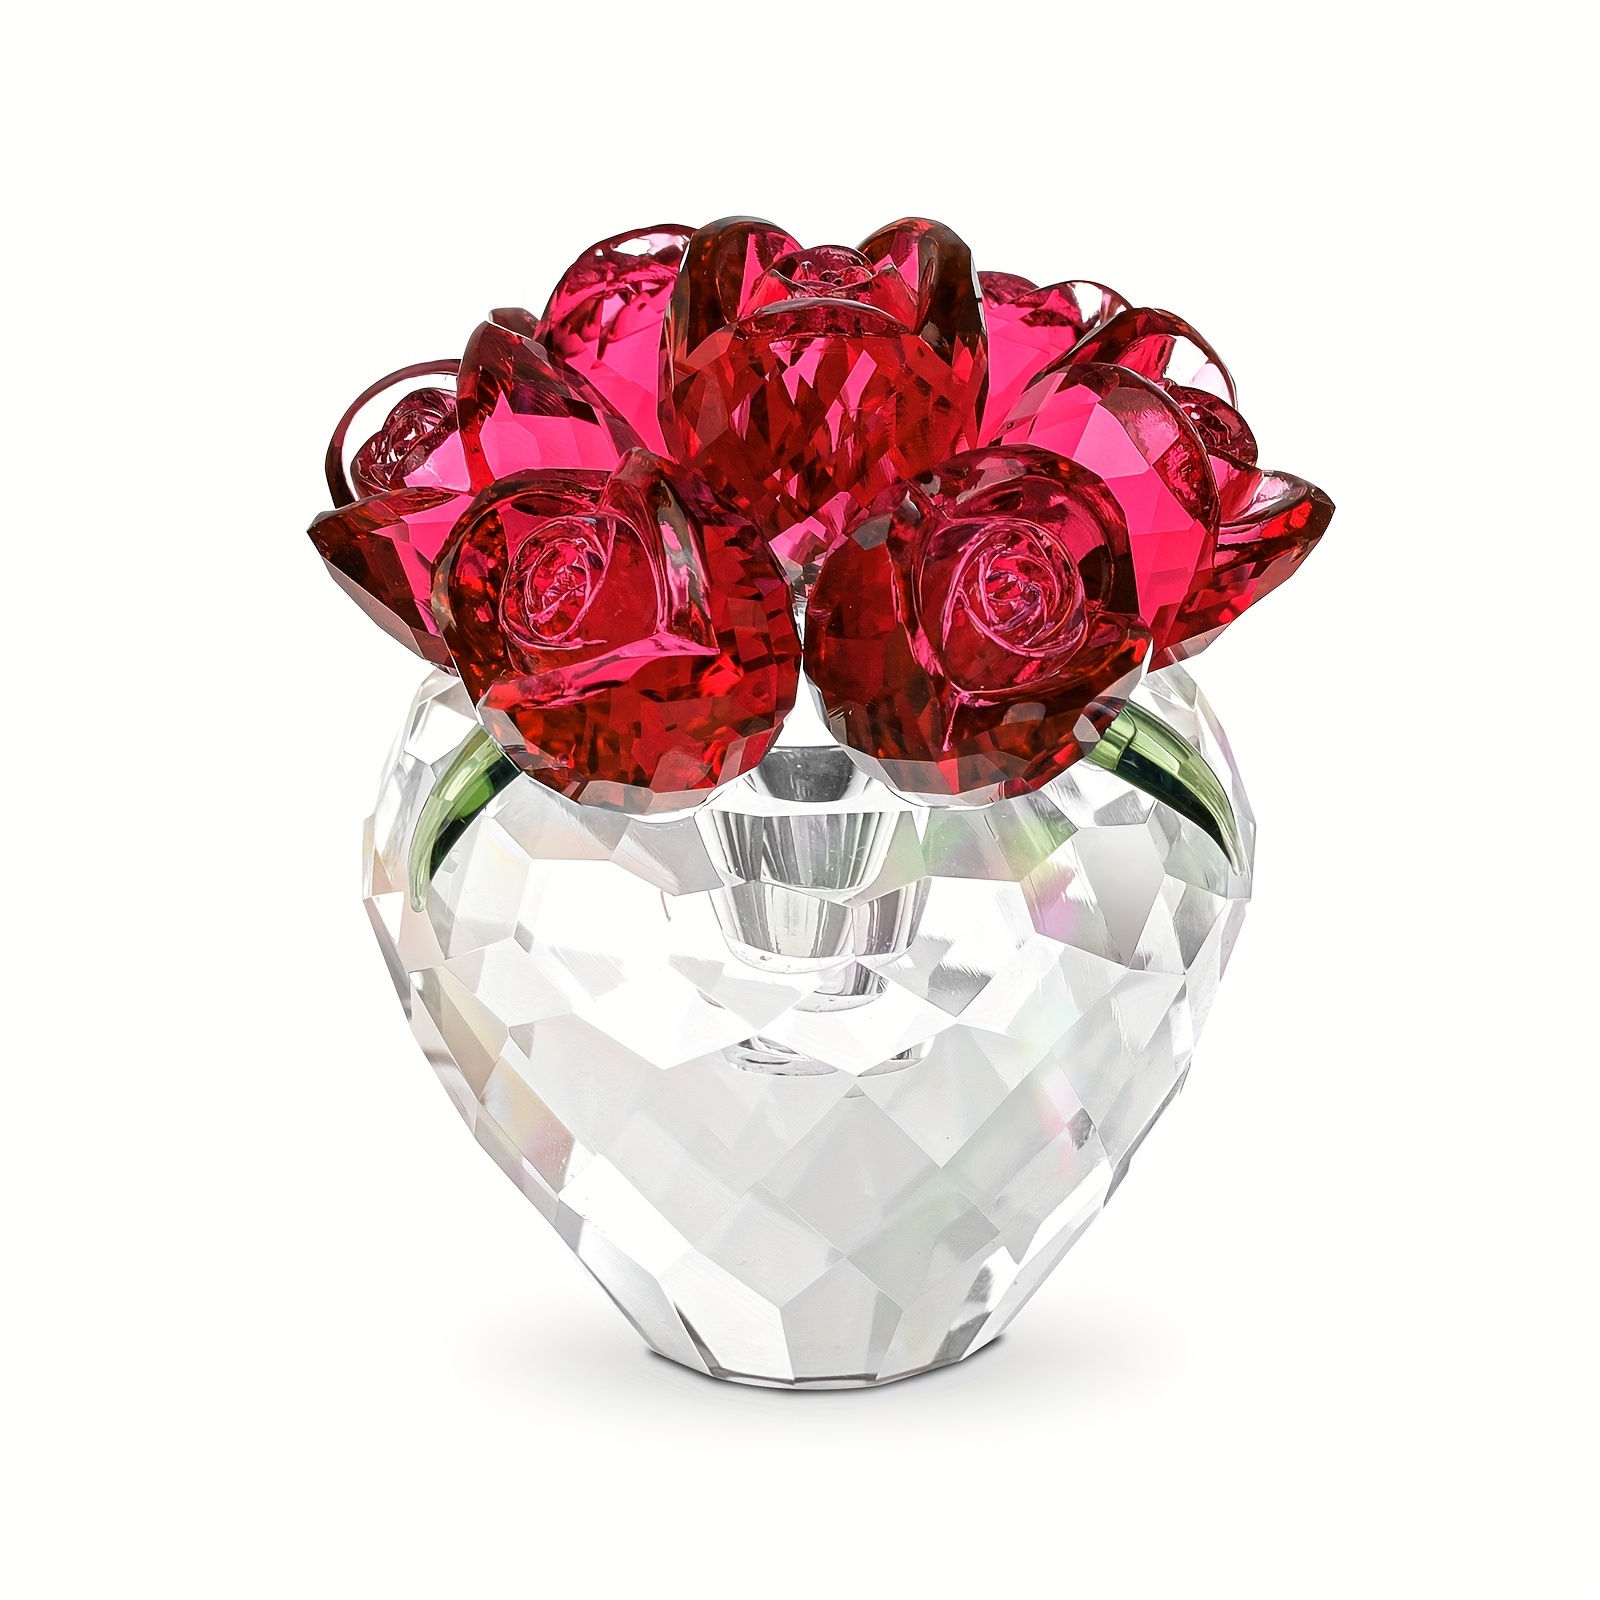 H&D HYALINE & DORA Crystal Red Rose Figurines Collectible with Outer Heart  Ring, Glass Flower Ornament Paperweight Centerpieces for Home Table Decor